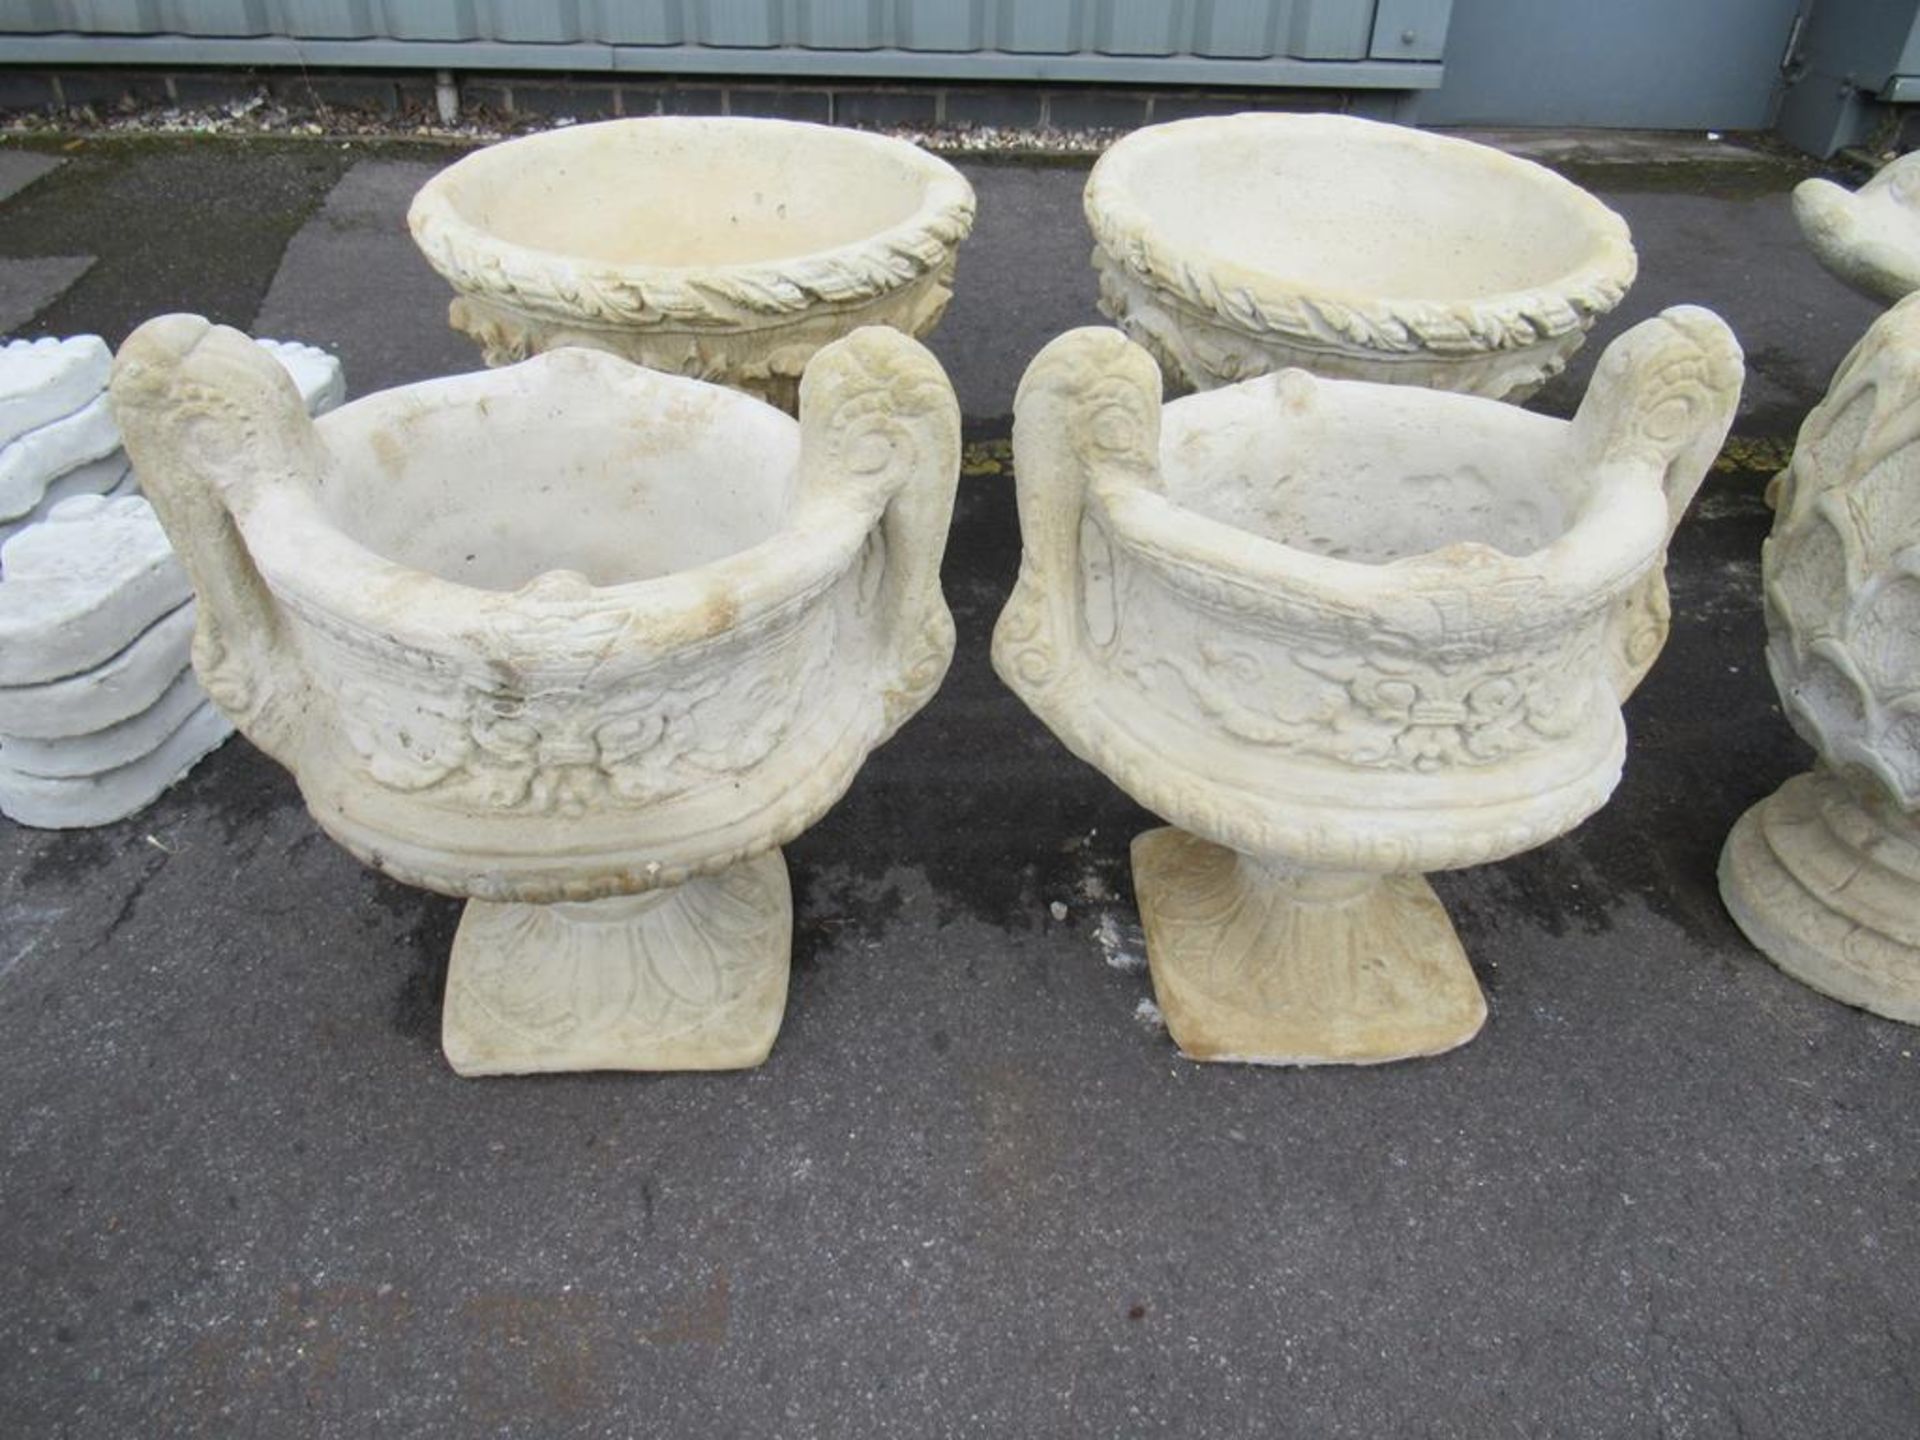 2x Two Handled Urns on Stands